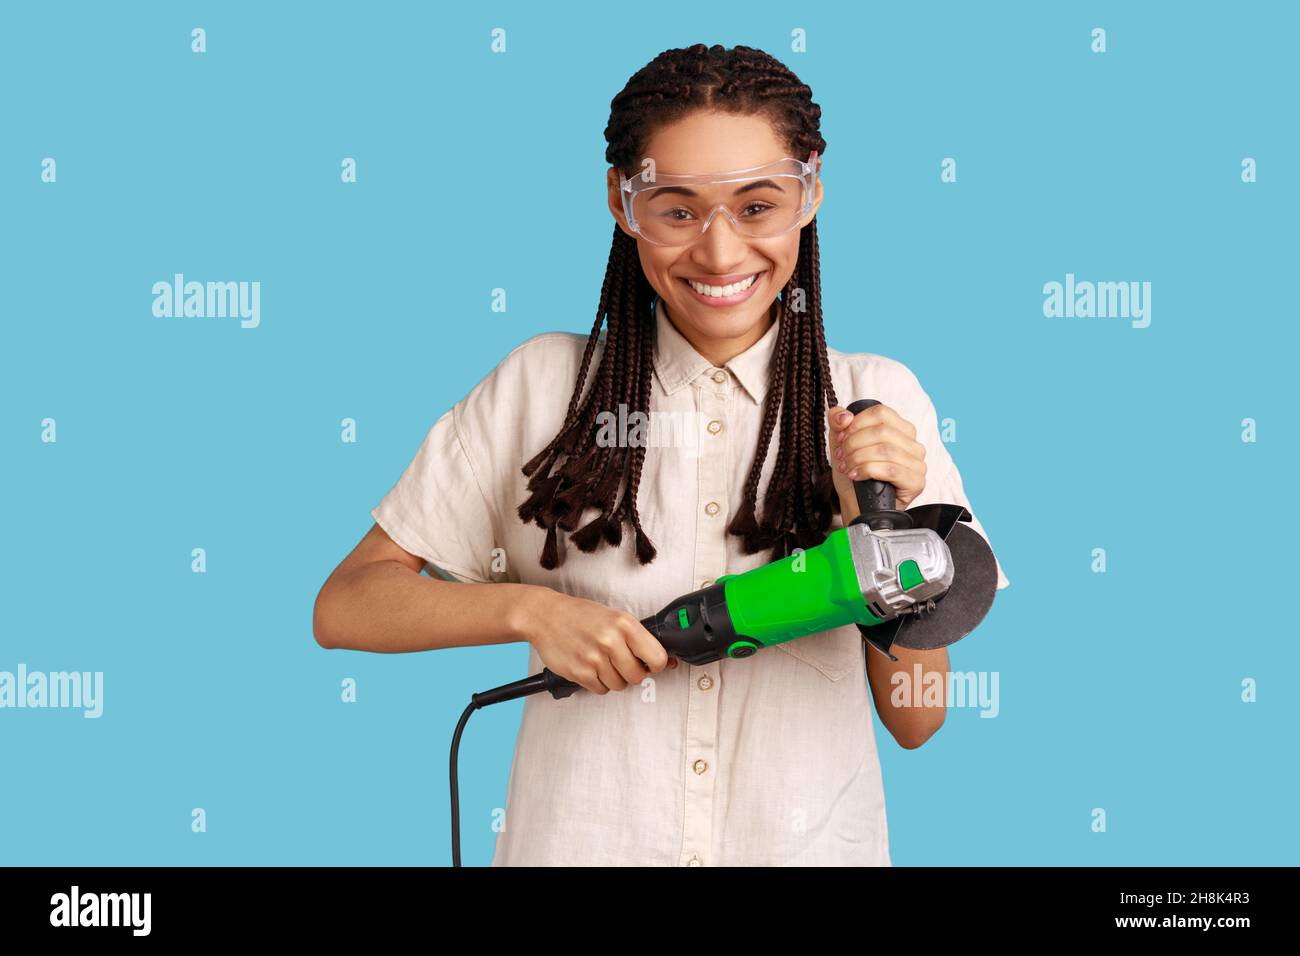 Portrait of smiling woman with dreadlocks holding grinder saw, looking at camera with positive emotions, wearing white shirt and protective glasses. Indoor studio shot isolated on blue background. Stock Photo